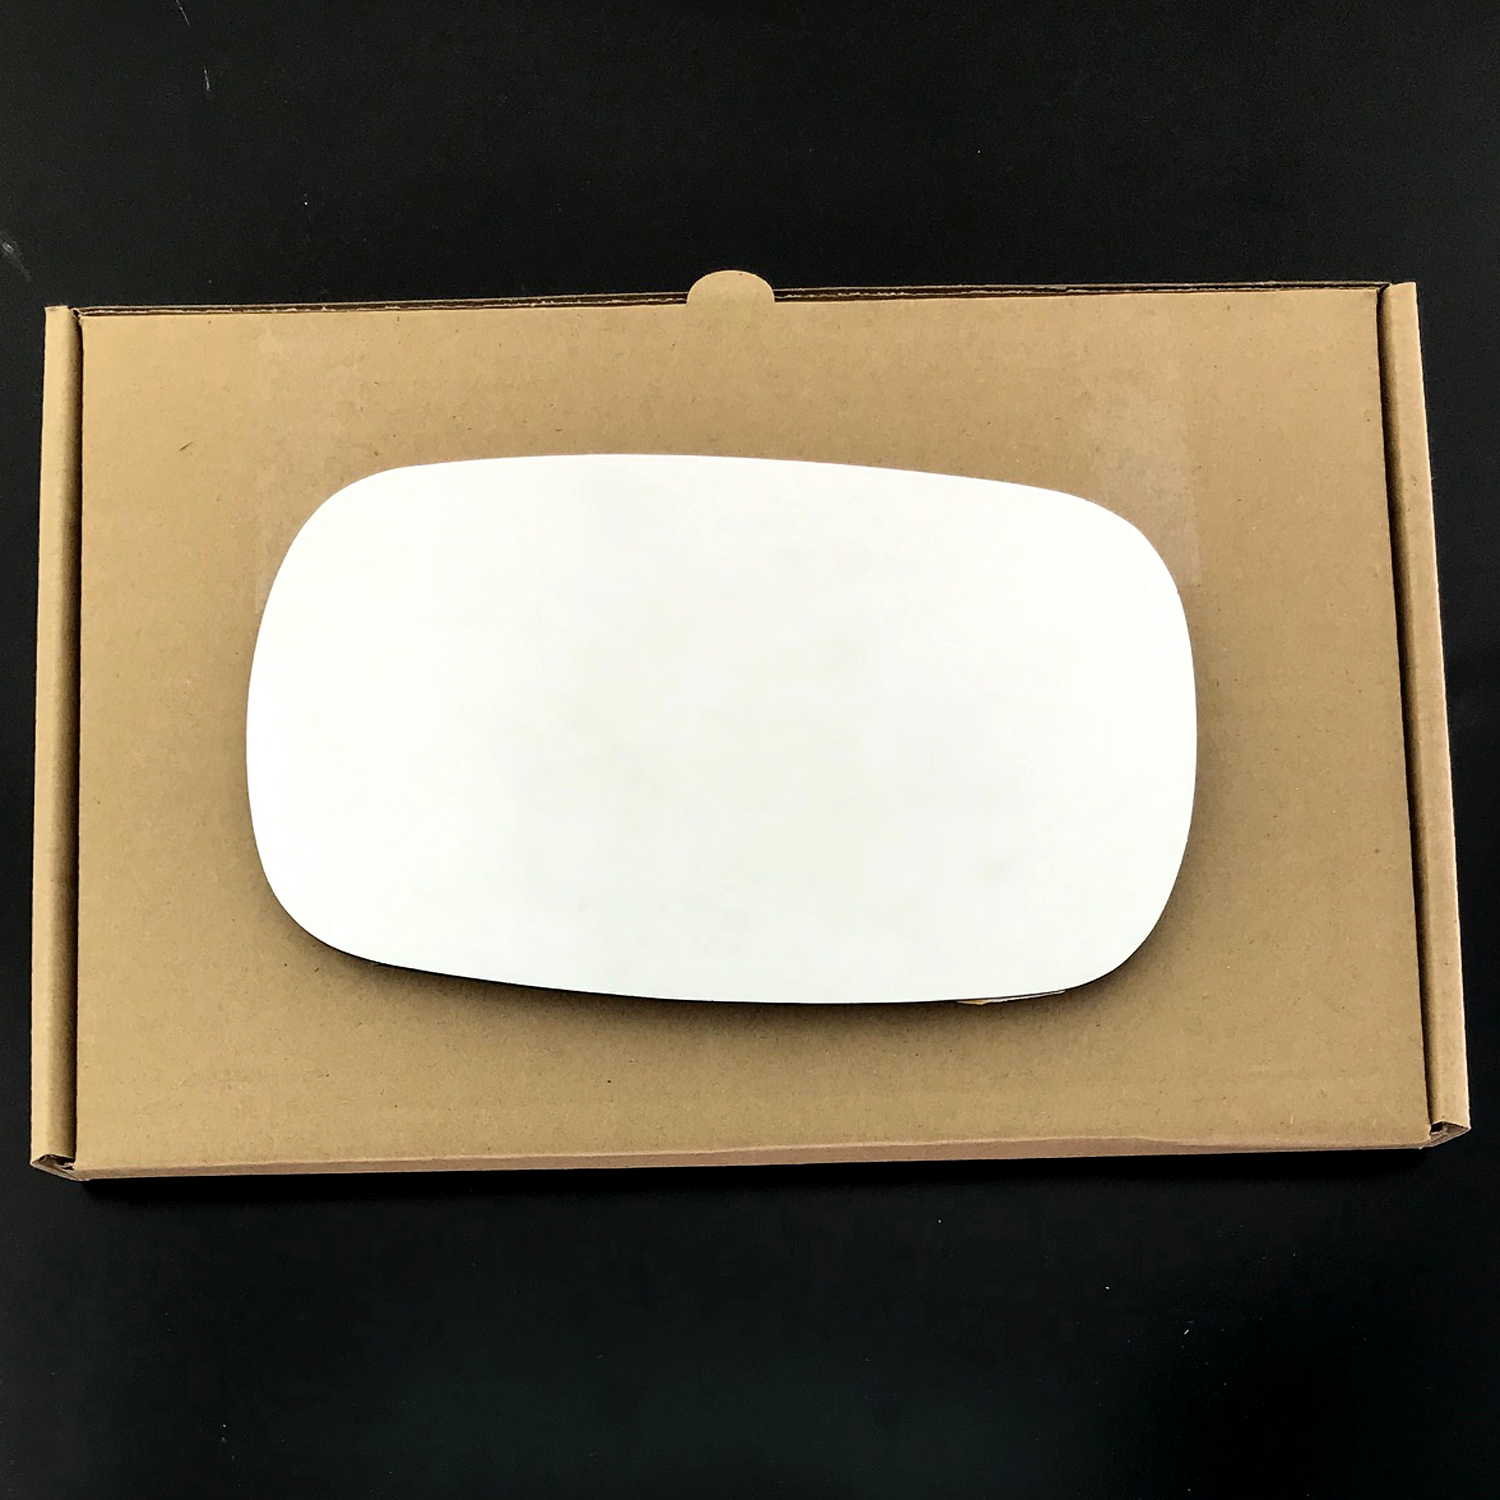 FIAT Doblo Wing Mirror Glass RIGHT HAND ( UK Driver Side ) 2000 to 2008 – Convex Wing Mirror